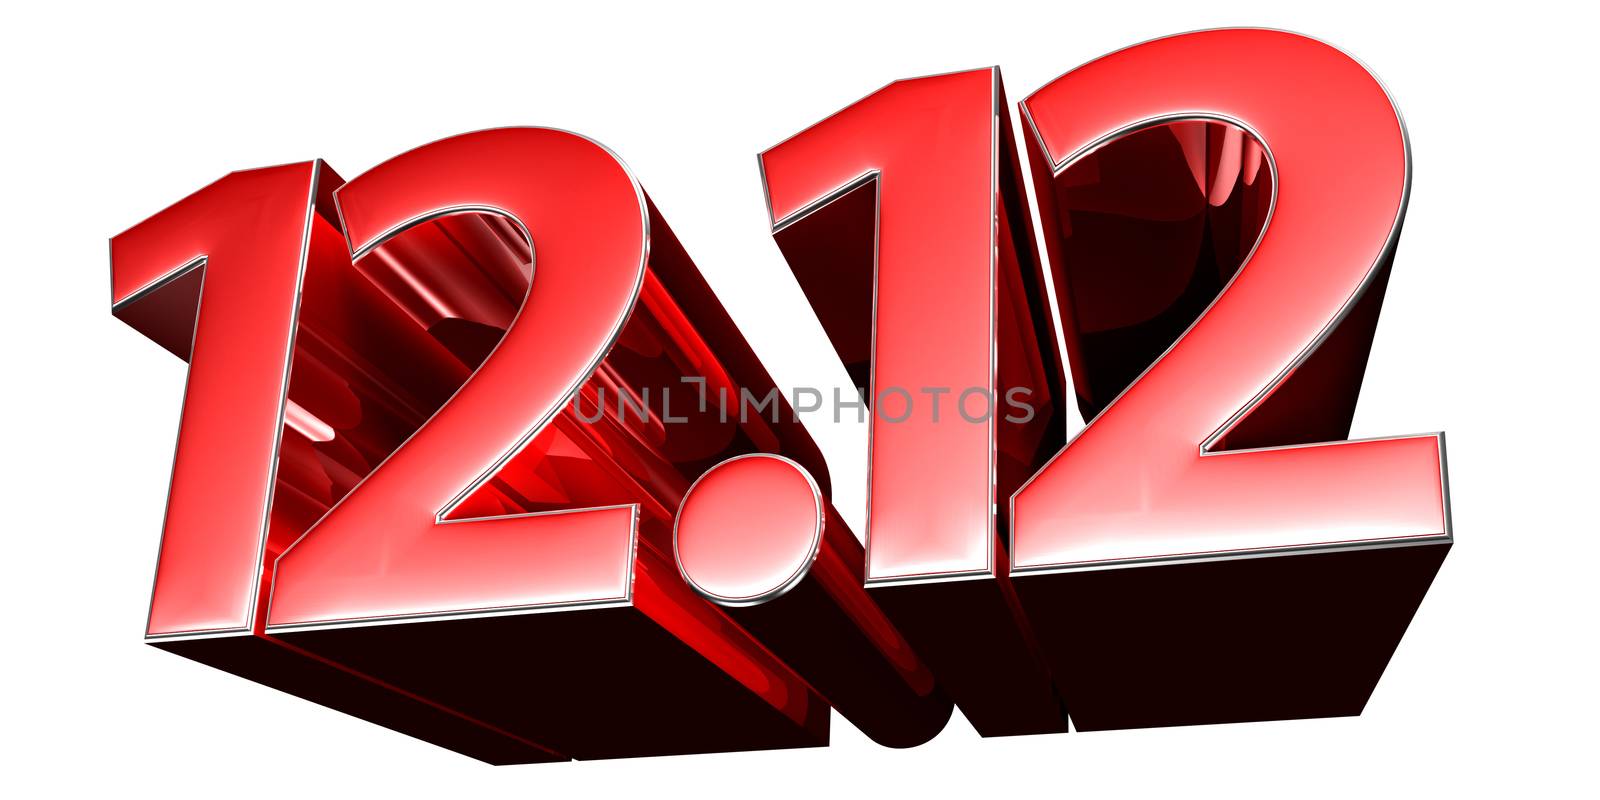 Red numbers 12.12 isolated on white background illustration 3D rendering with clipping path.